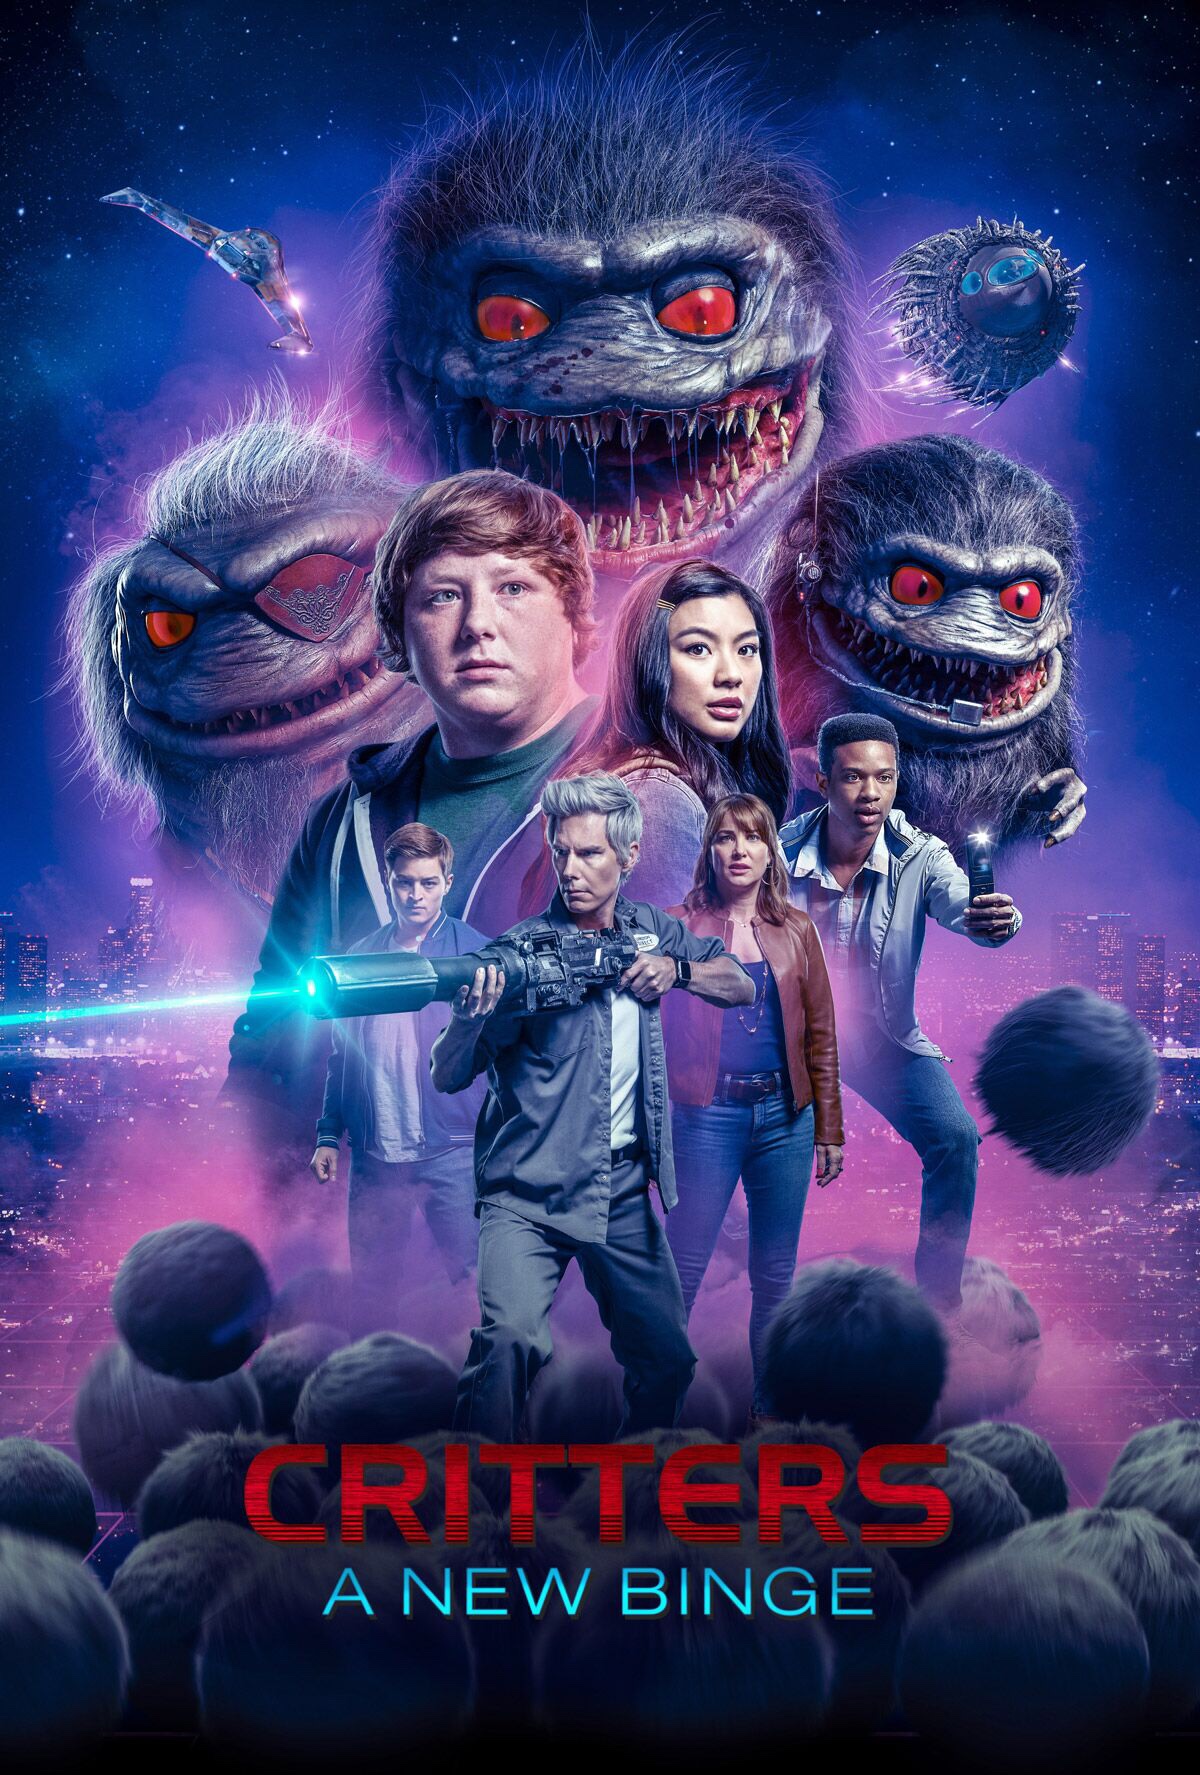 critters a new binge poster